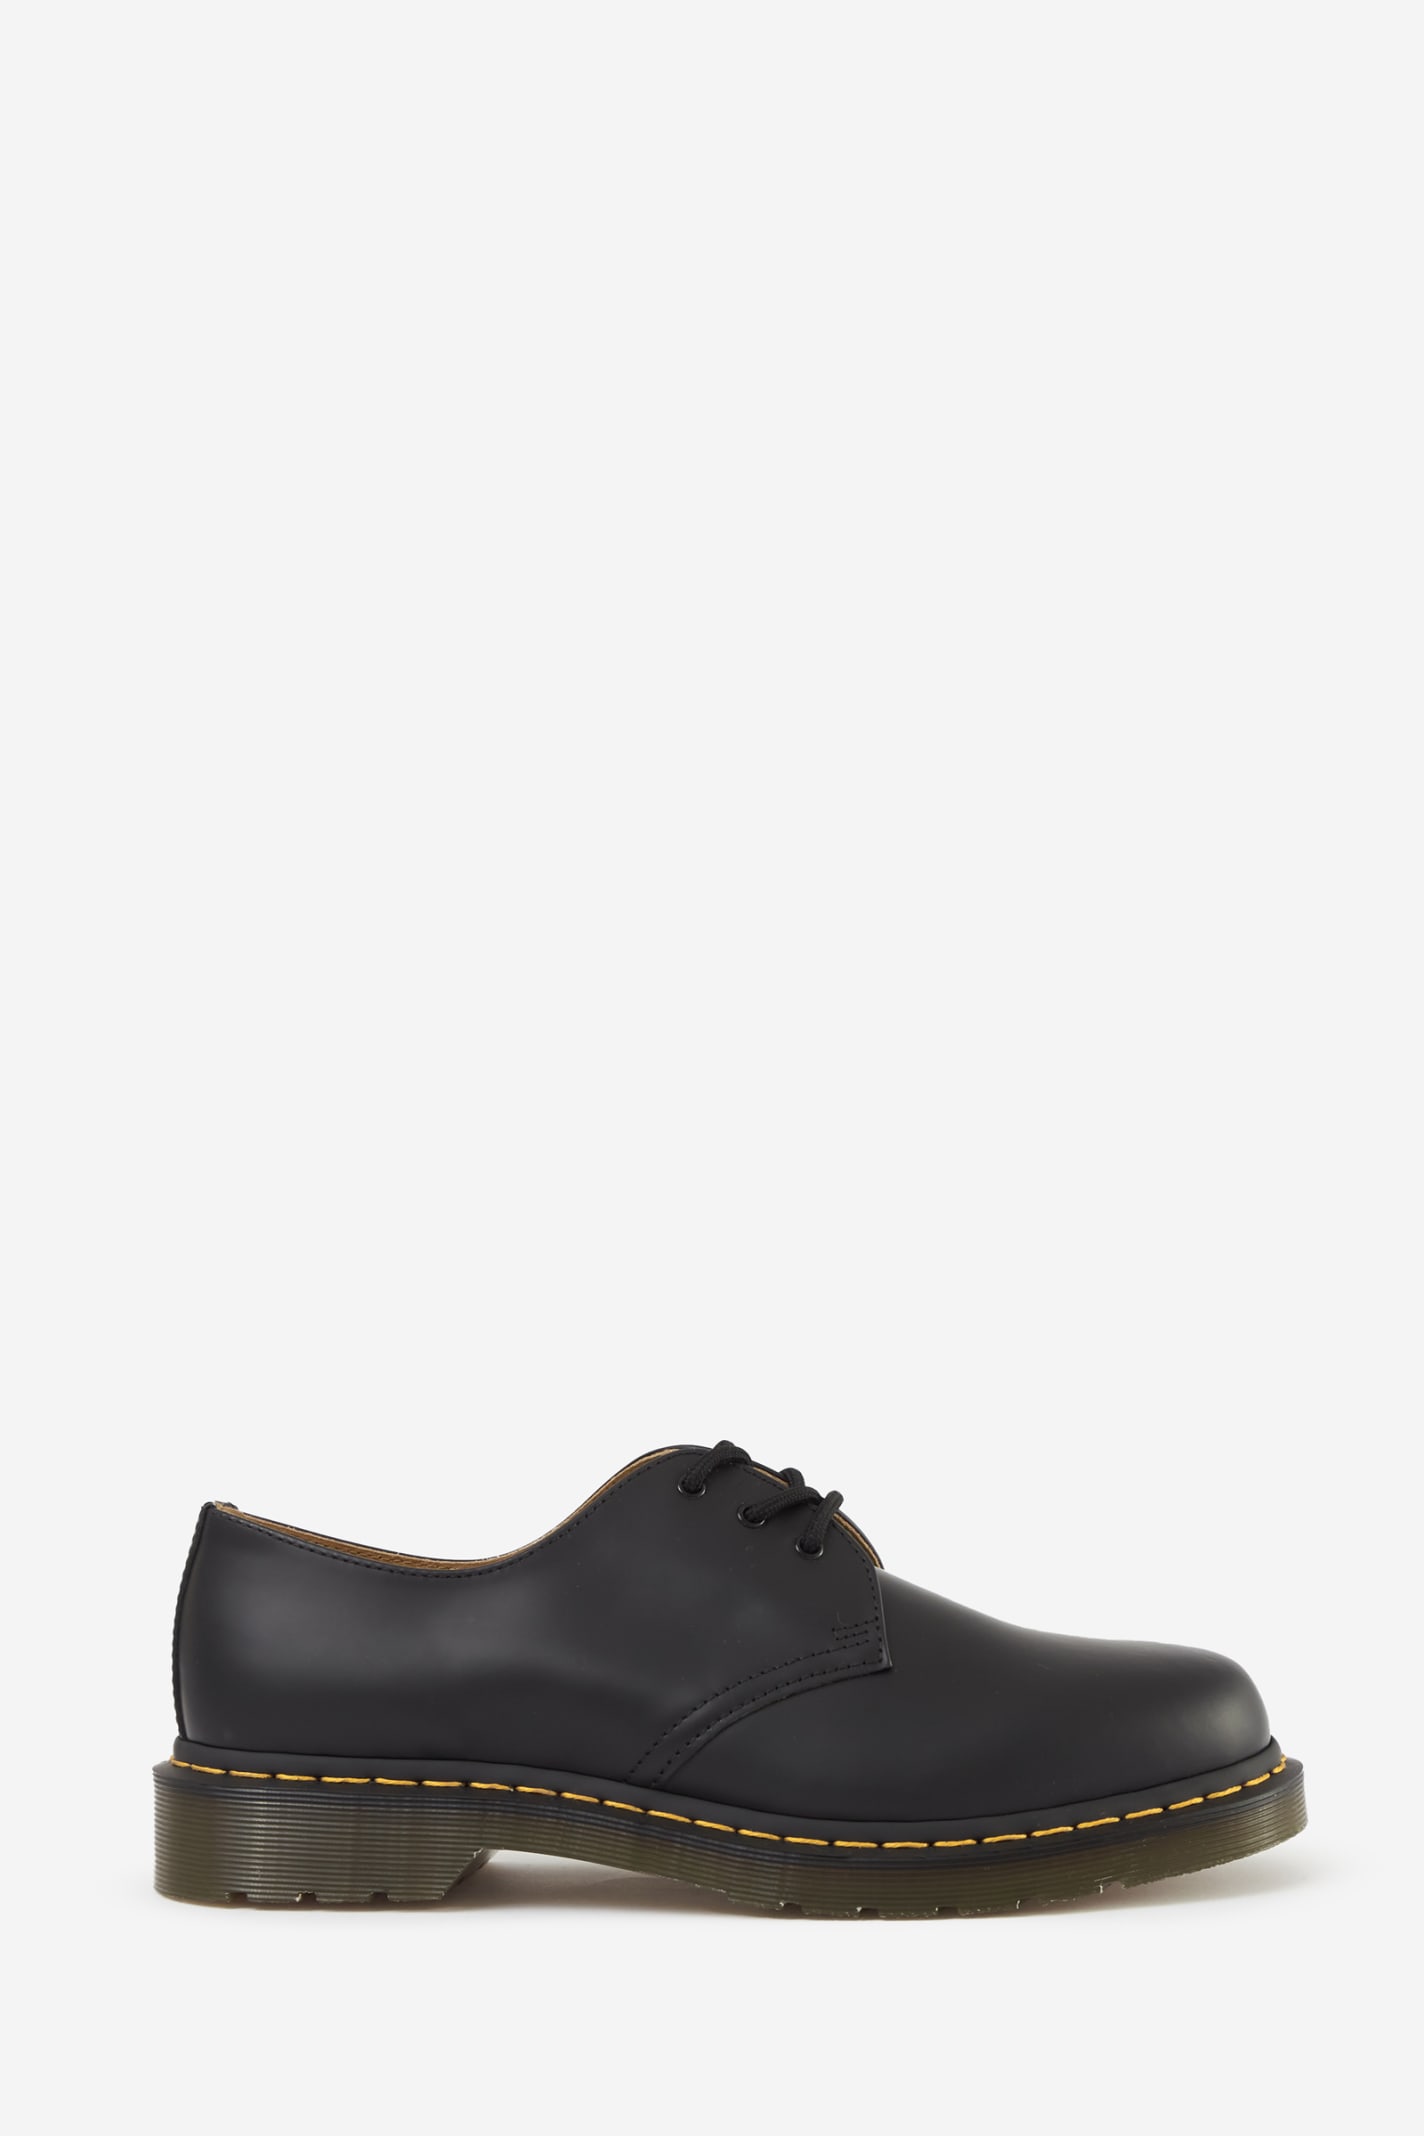 DR. MARTENS' 1461 SMOOTH COMBAT BOOTS